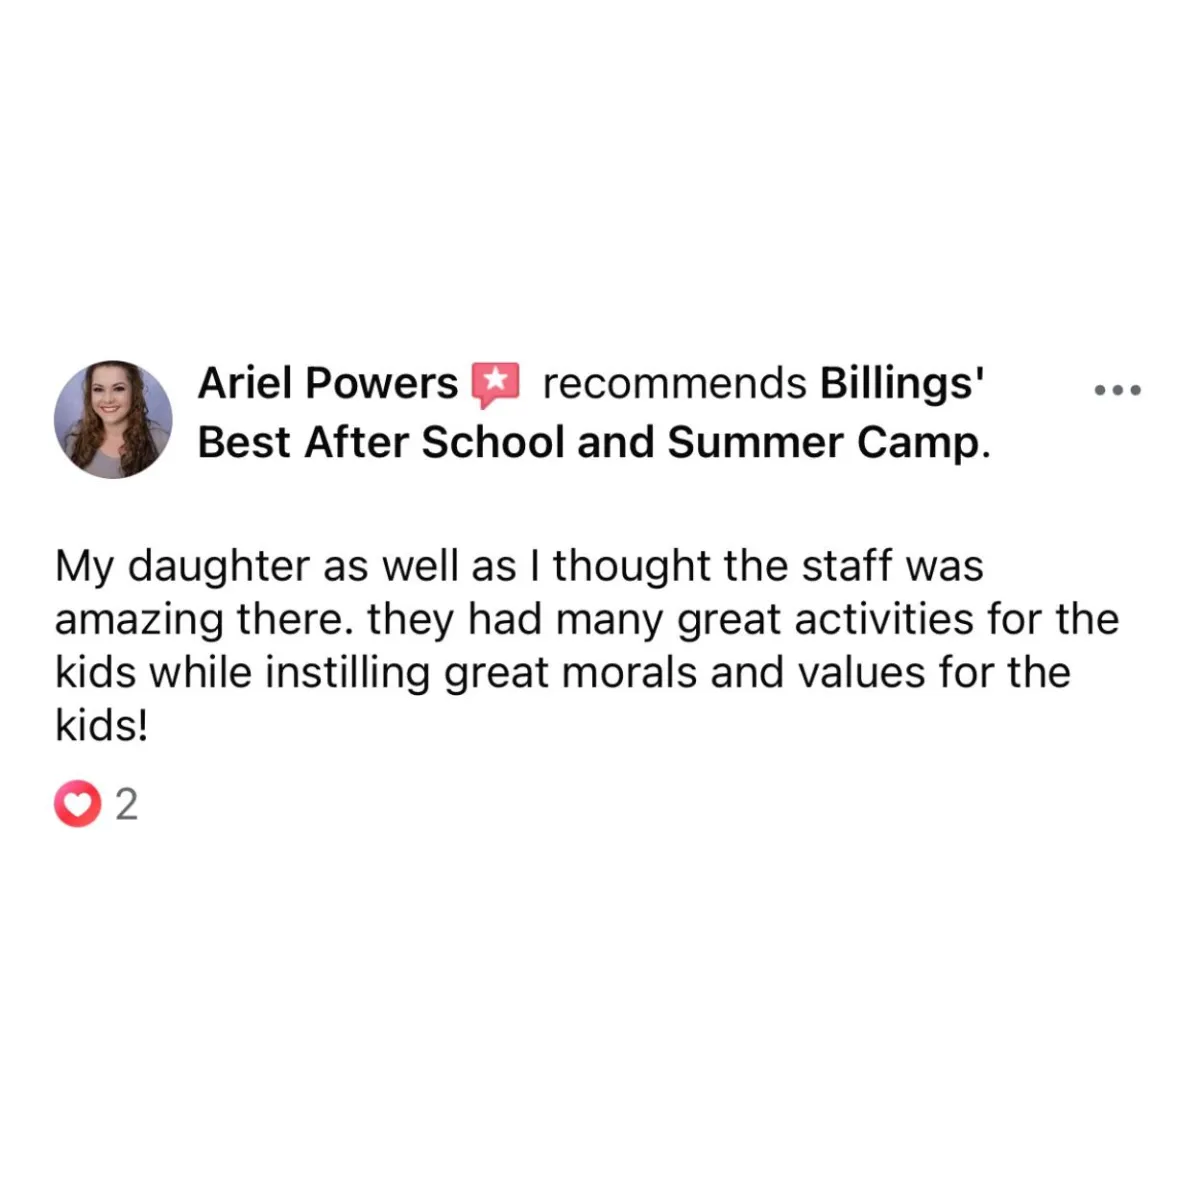 5 Star Review For Billings’ Best After School and Summer Camp